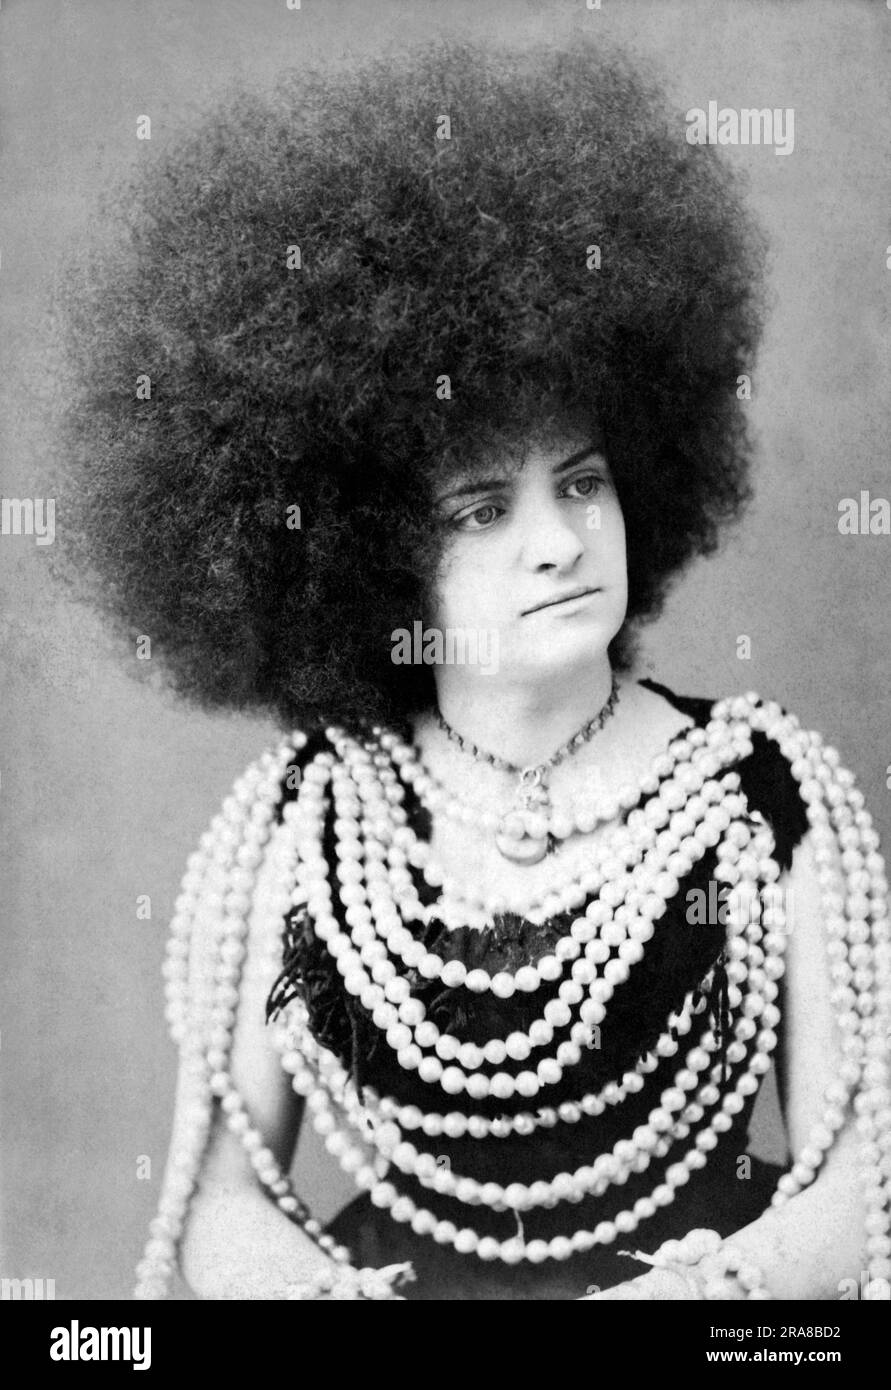 New York, New York:  c. 1880. A protrait of a woman vaudeville or circus performer with an immense afro hairdo and many rows of beads on her body Stock Photo